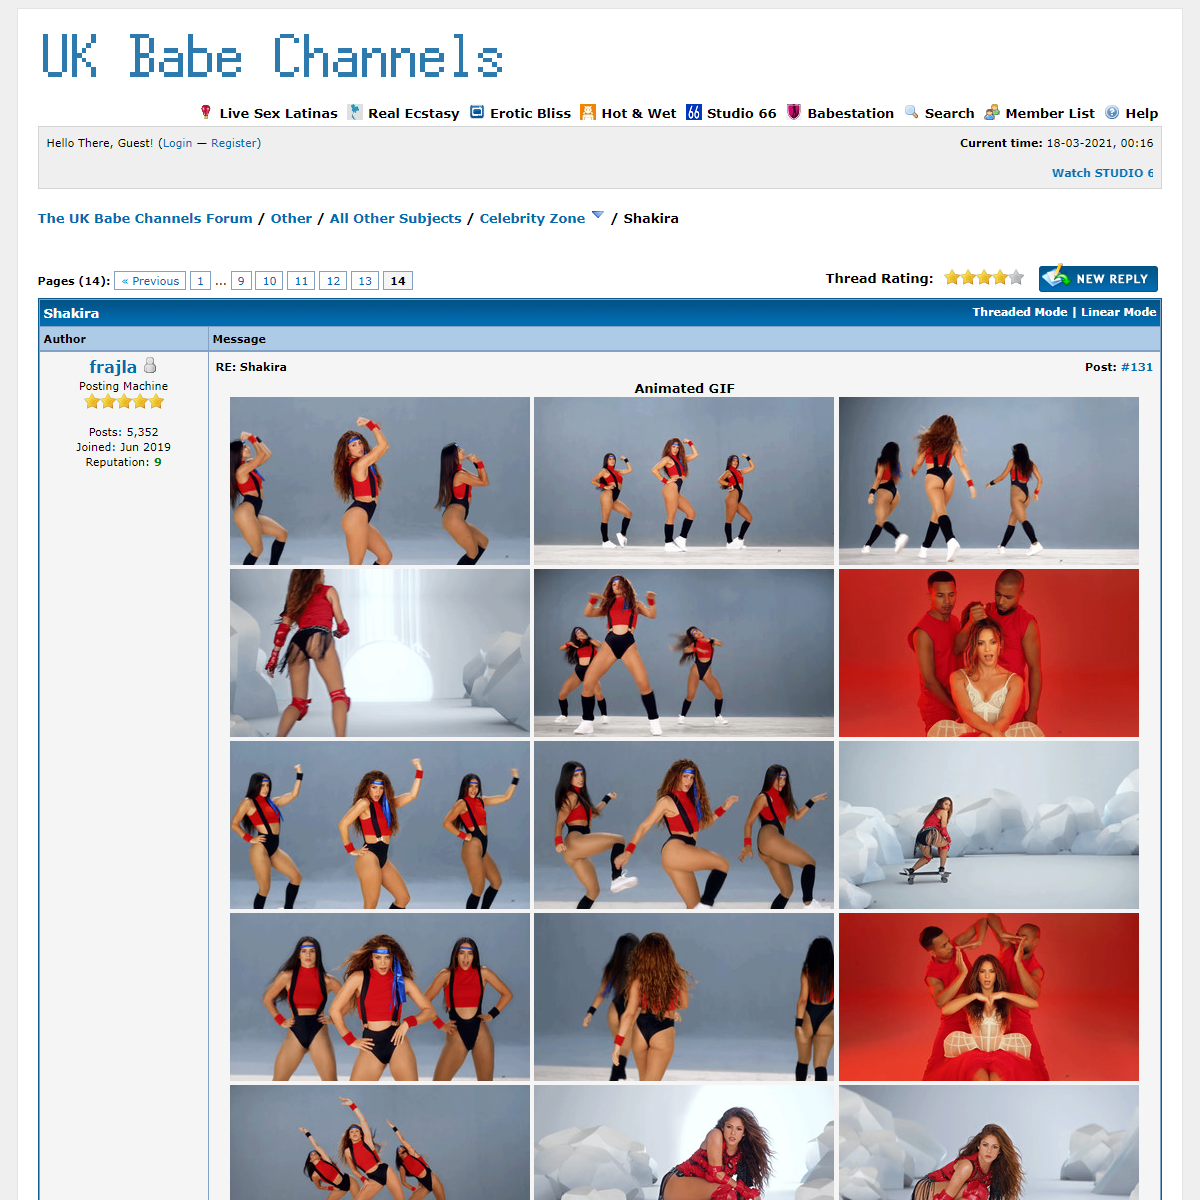 A complete backup of https://babeshows.co.uk/showthread.php?tid=9597&page=14